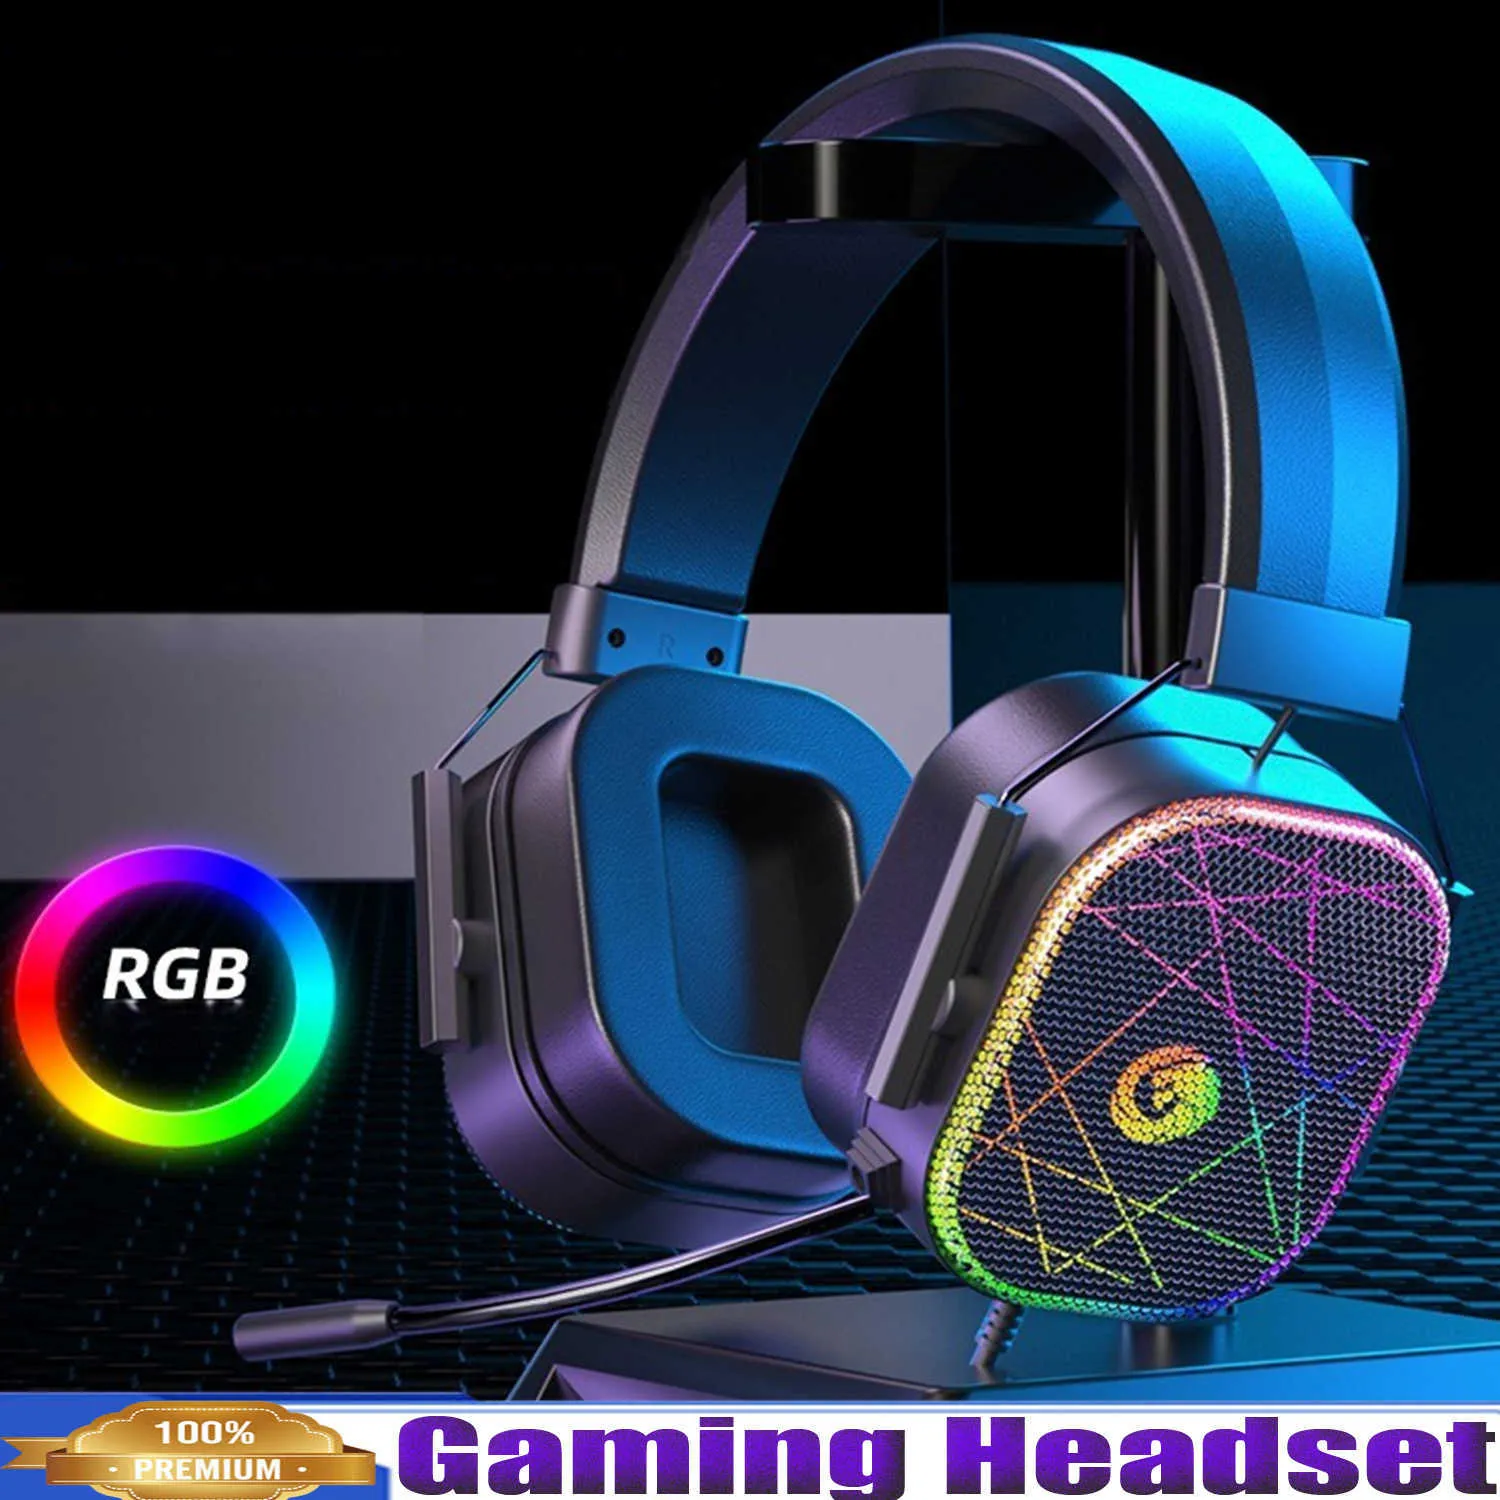 Esports Gaming Headset 3D Stereo Sound RGB LED Light Wired Headphone para PC Laptop PS4 PS5 Compatível Windows Android IOS System HKD230809